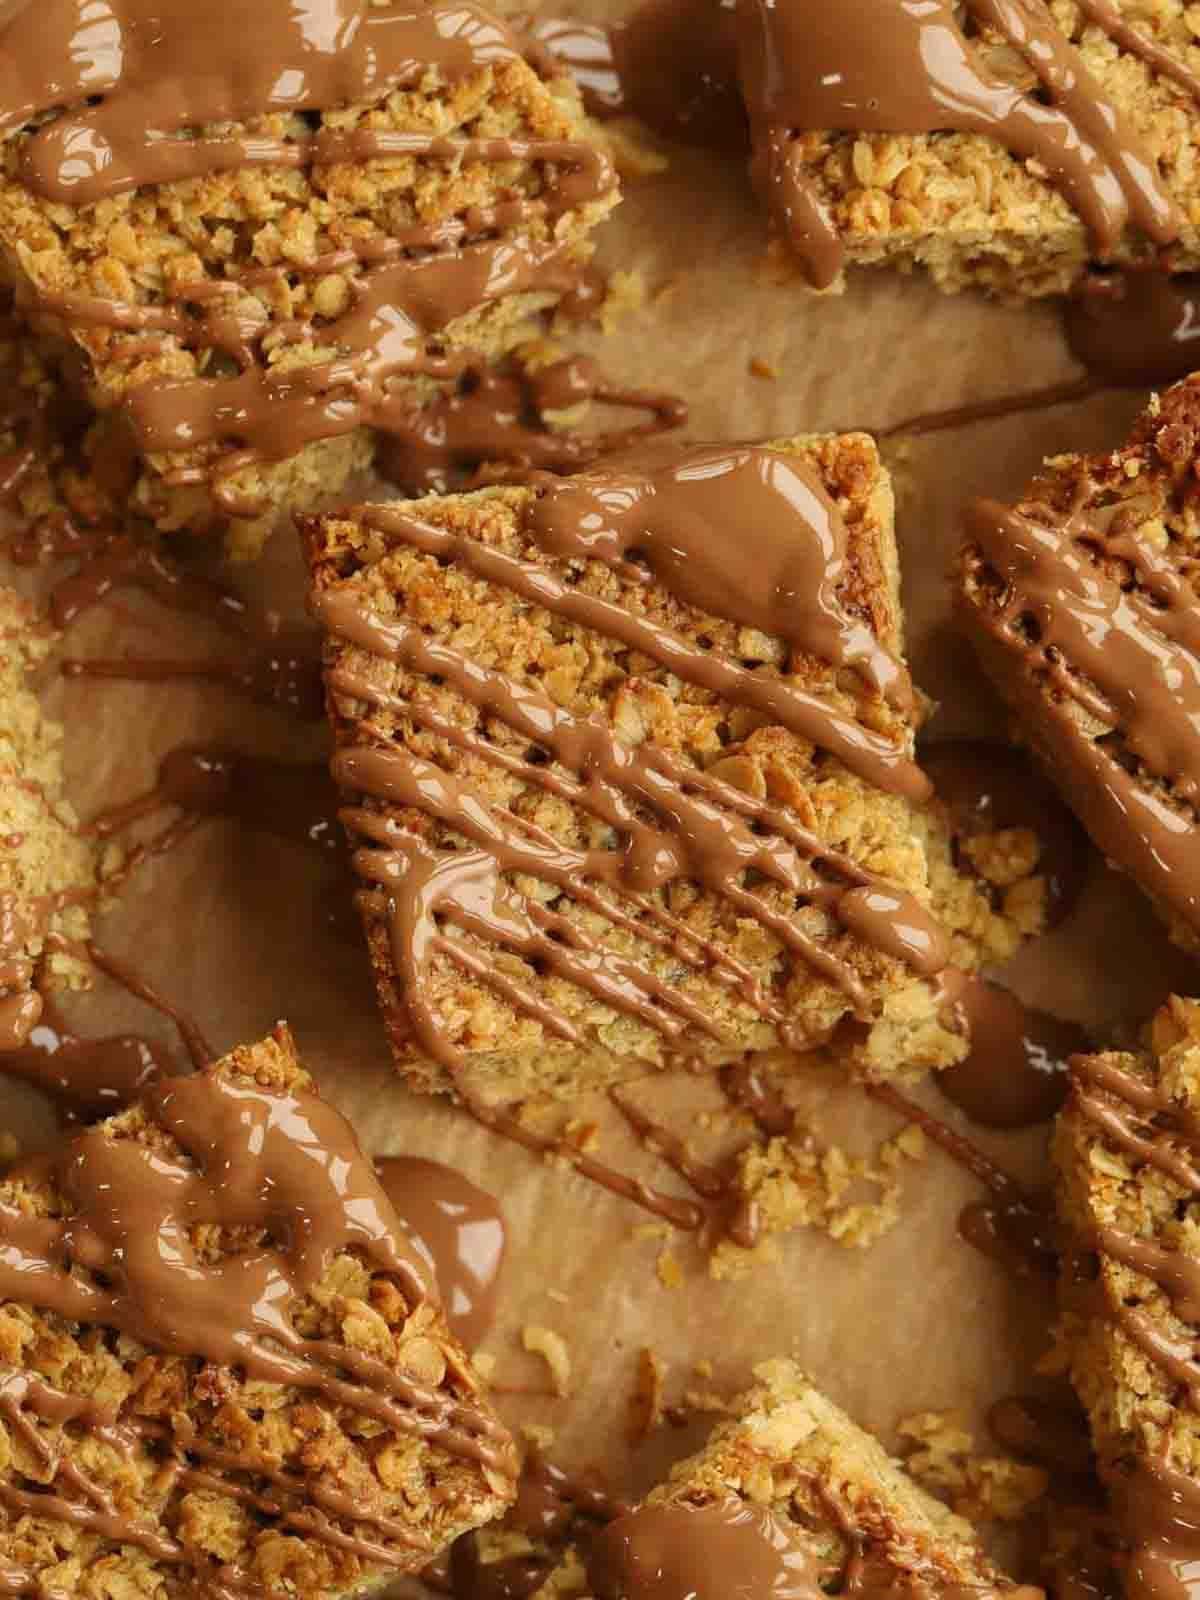 Squares of flapjack drizzled with melted chocolate on baking paper.